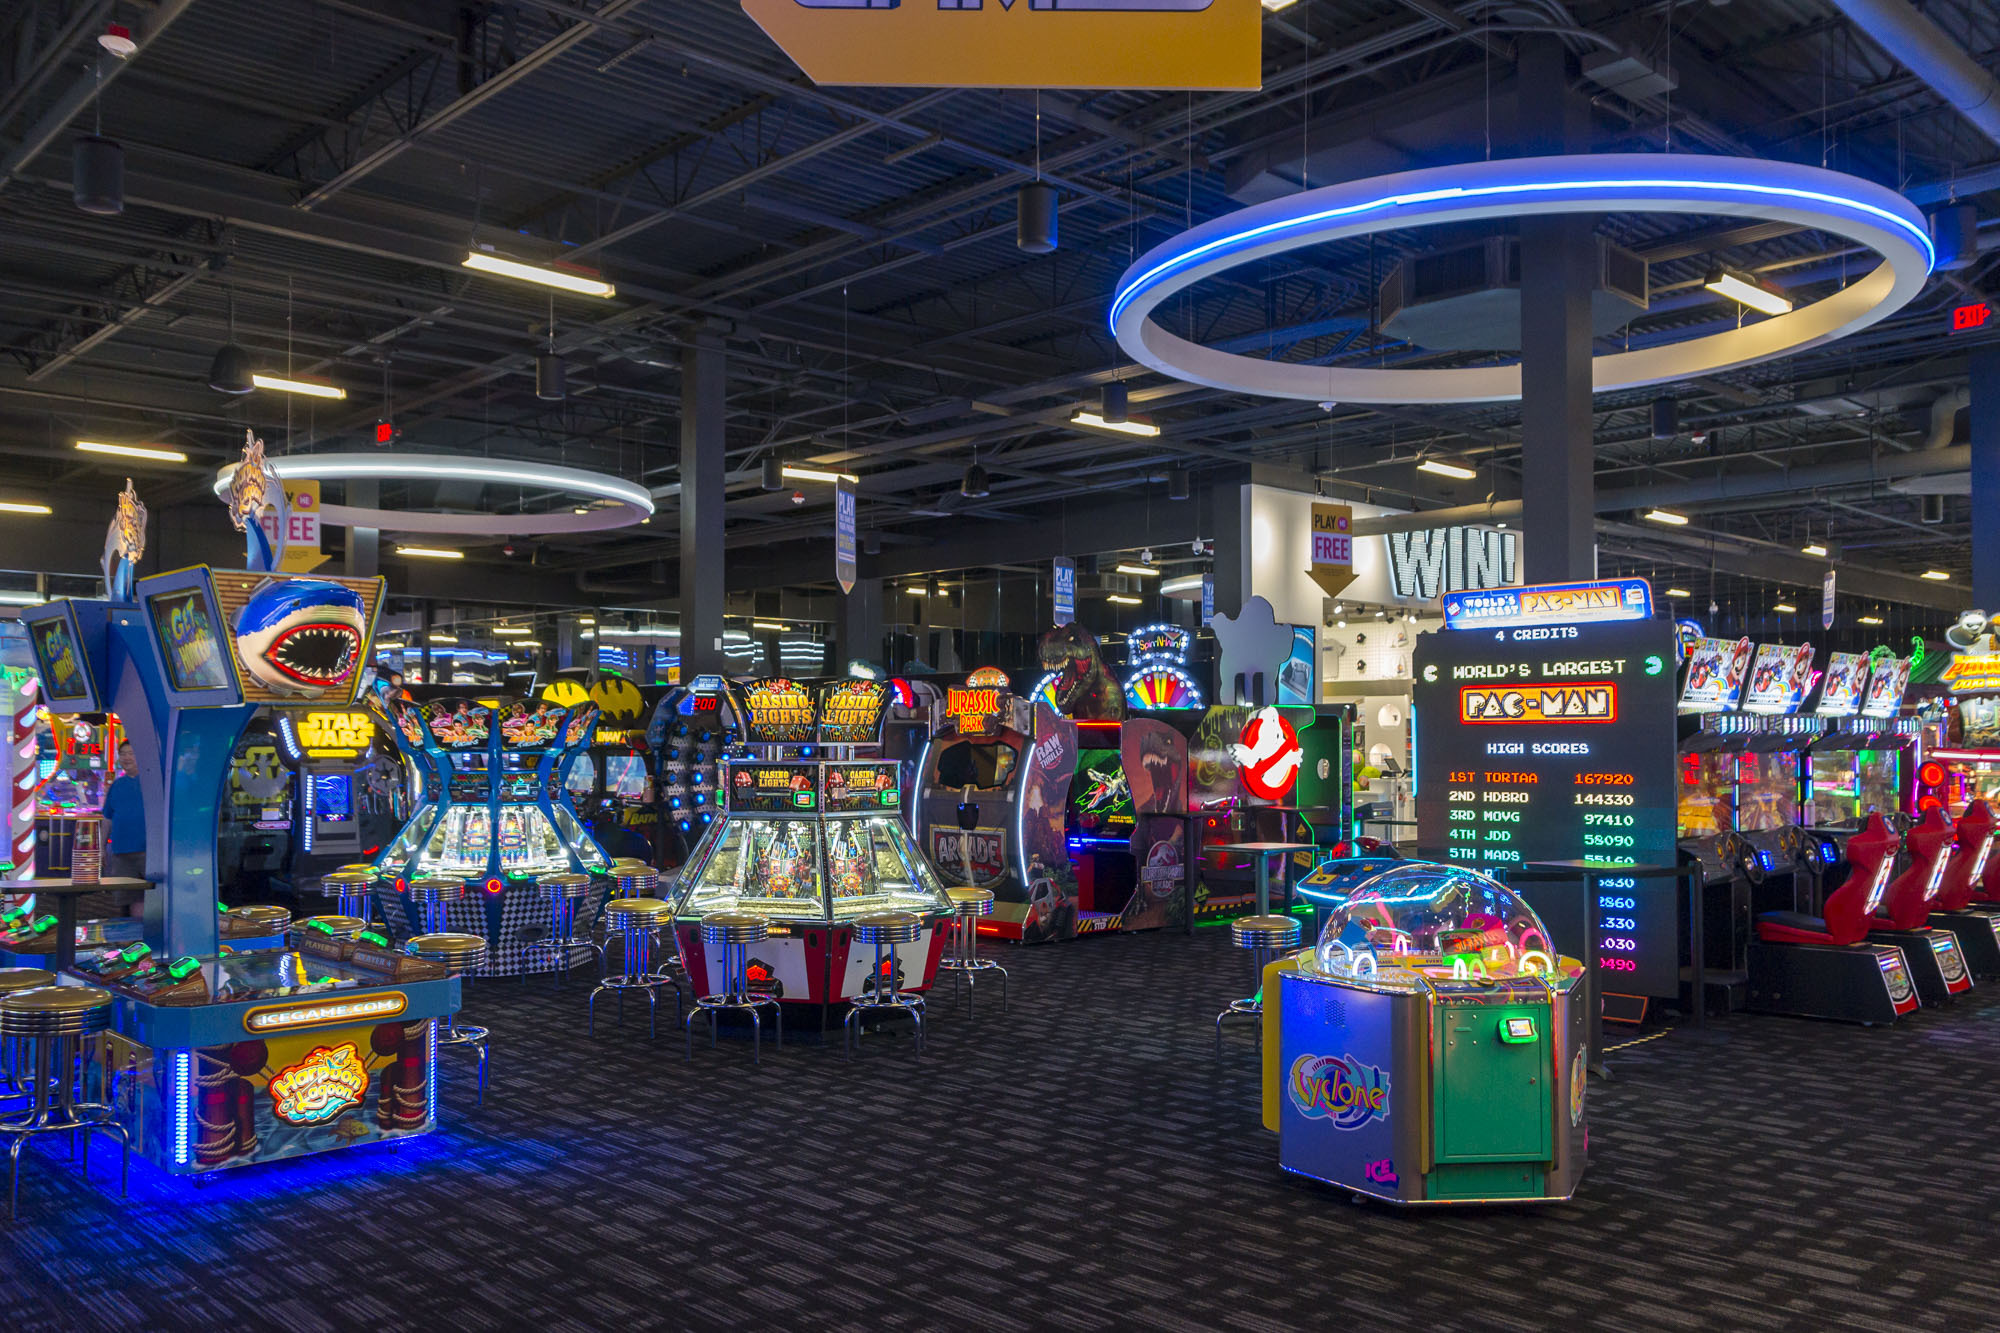 Dave & Buster's - Kid City Boston